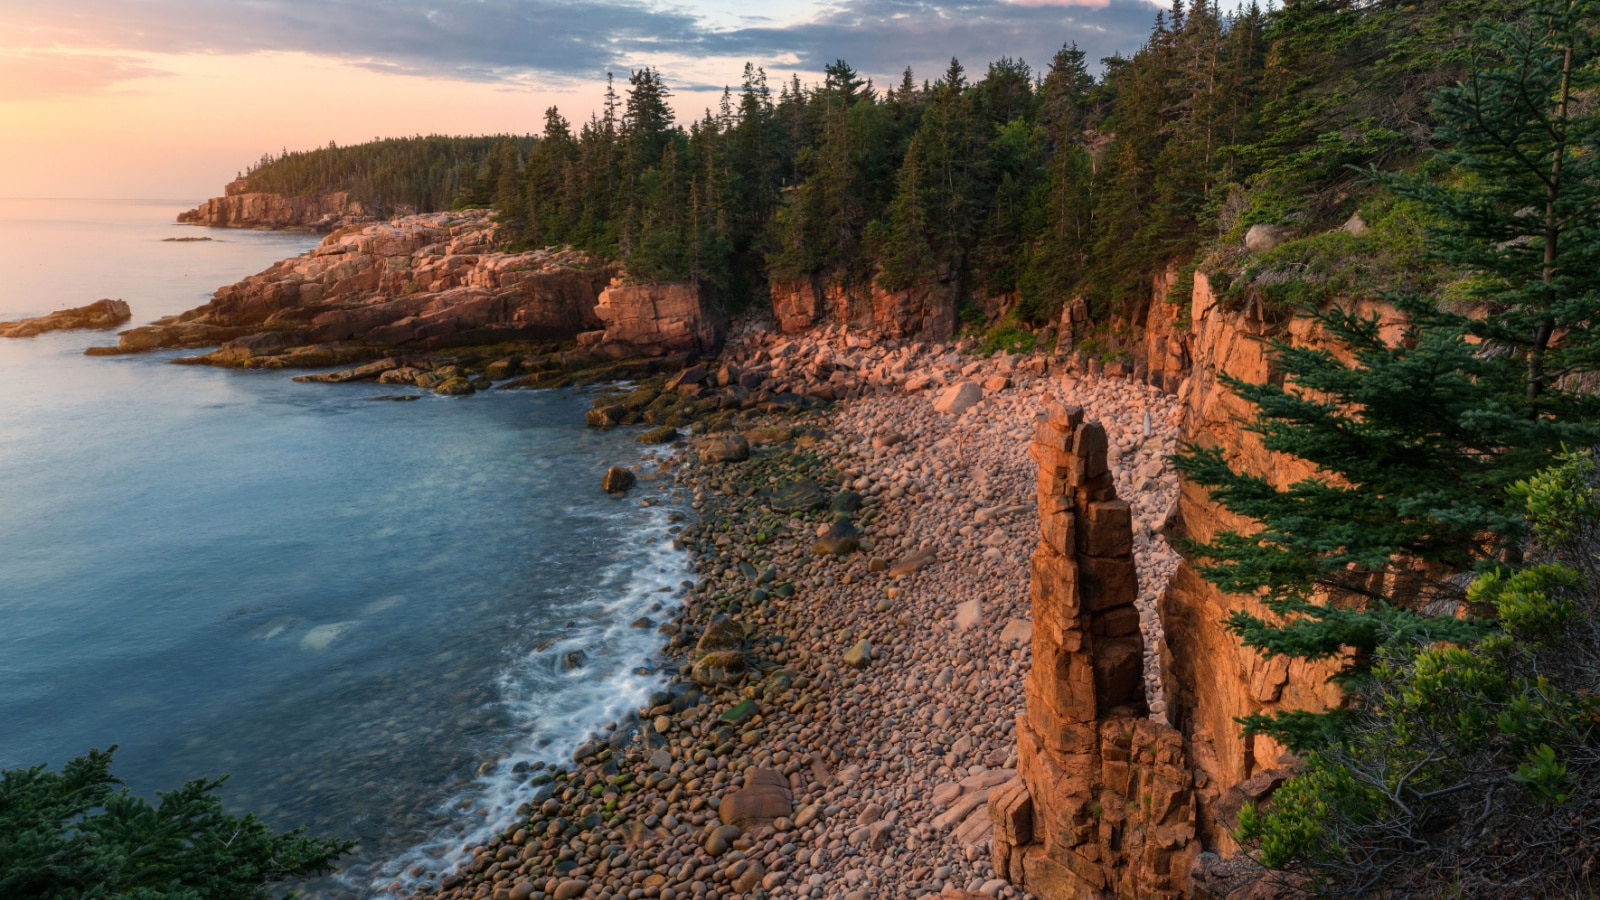 <p>Situated on Mount Desert Island, Maine’s only national park offers a rugged coastline, granite peaks, and serene lakes, attracting visitors for hiking, biking, and scenic drives along the picturesque Park Loop Road.</p>